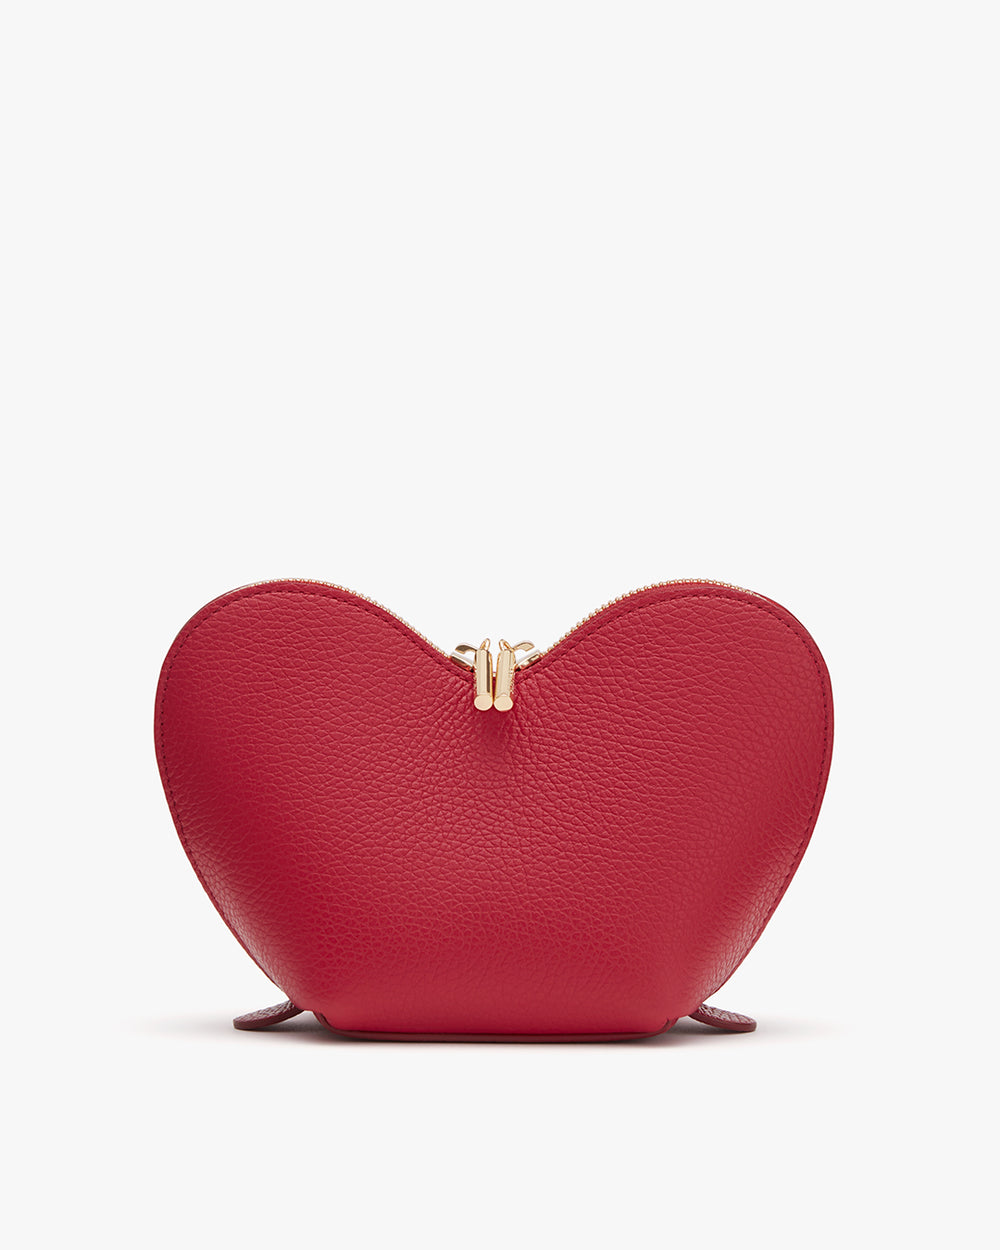 Heart-shaped purse with clasp closure standing upright.